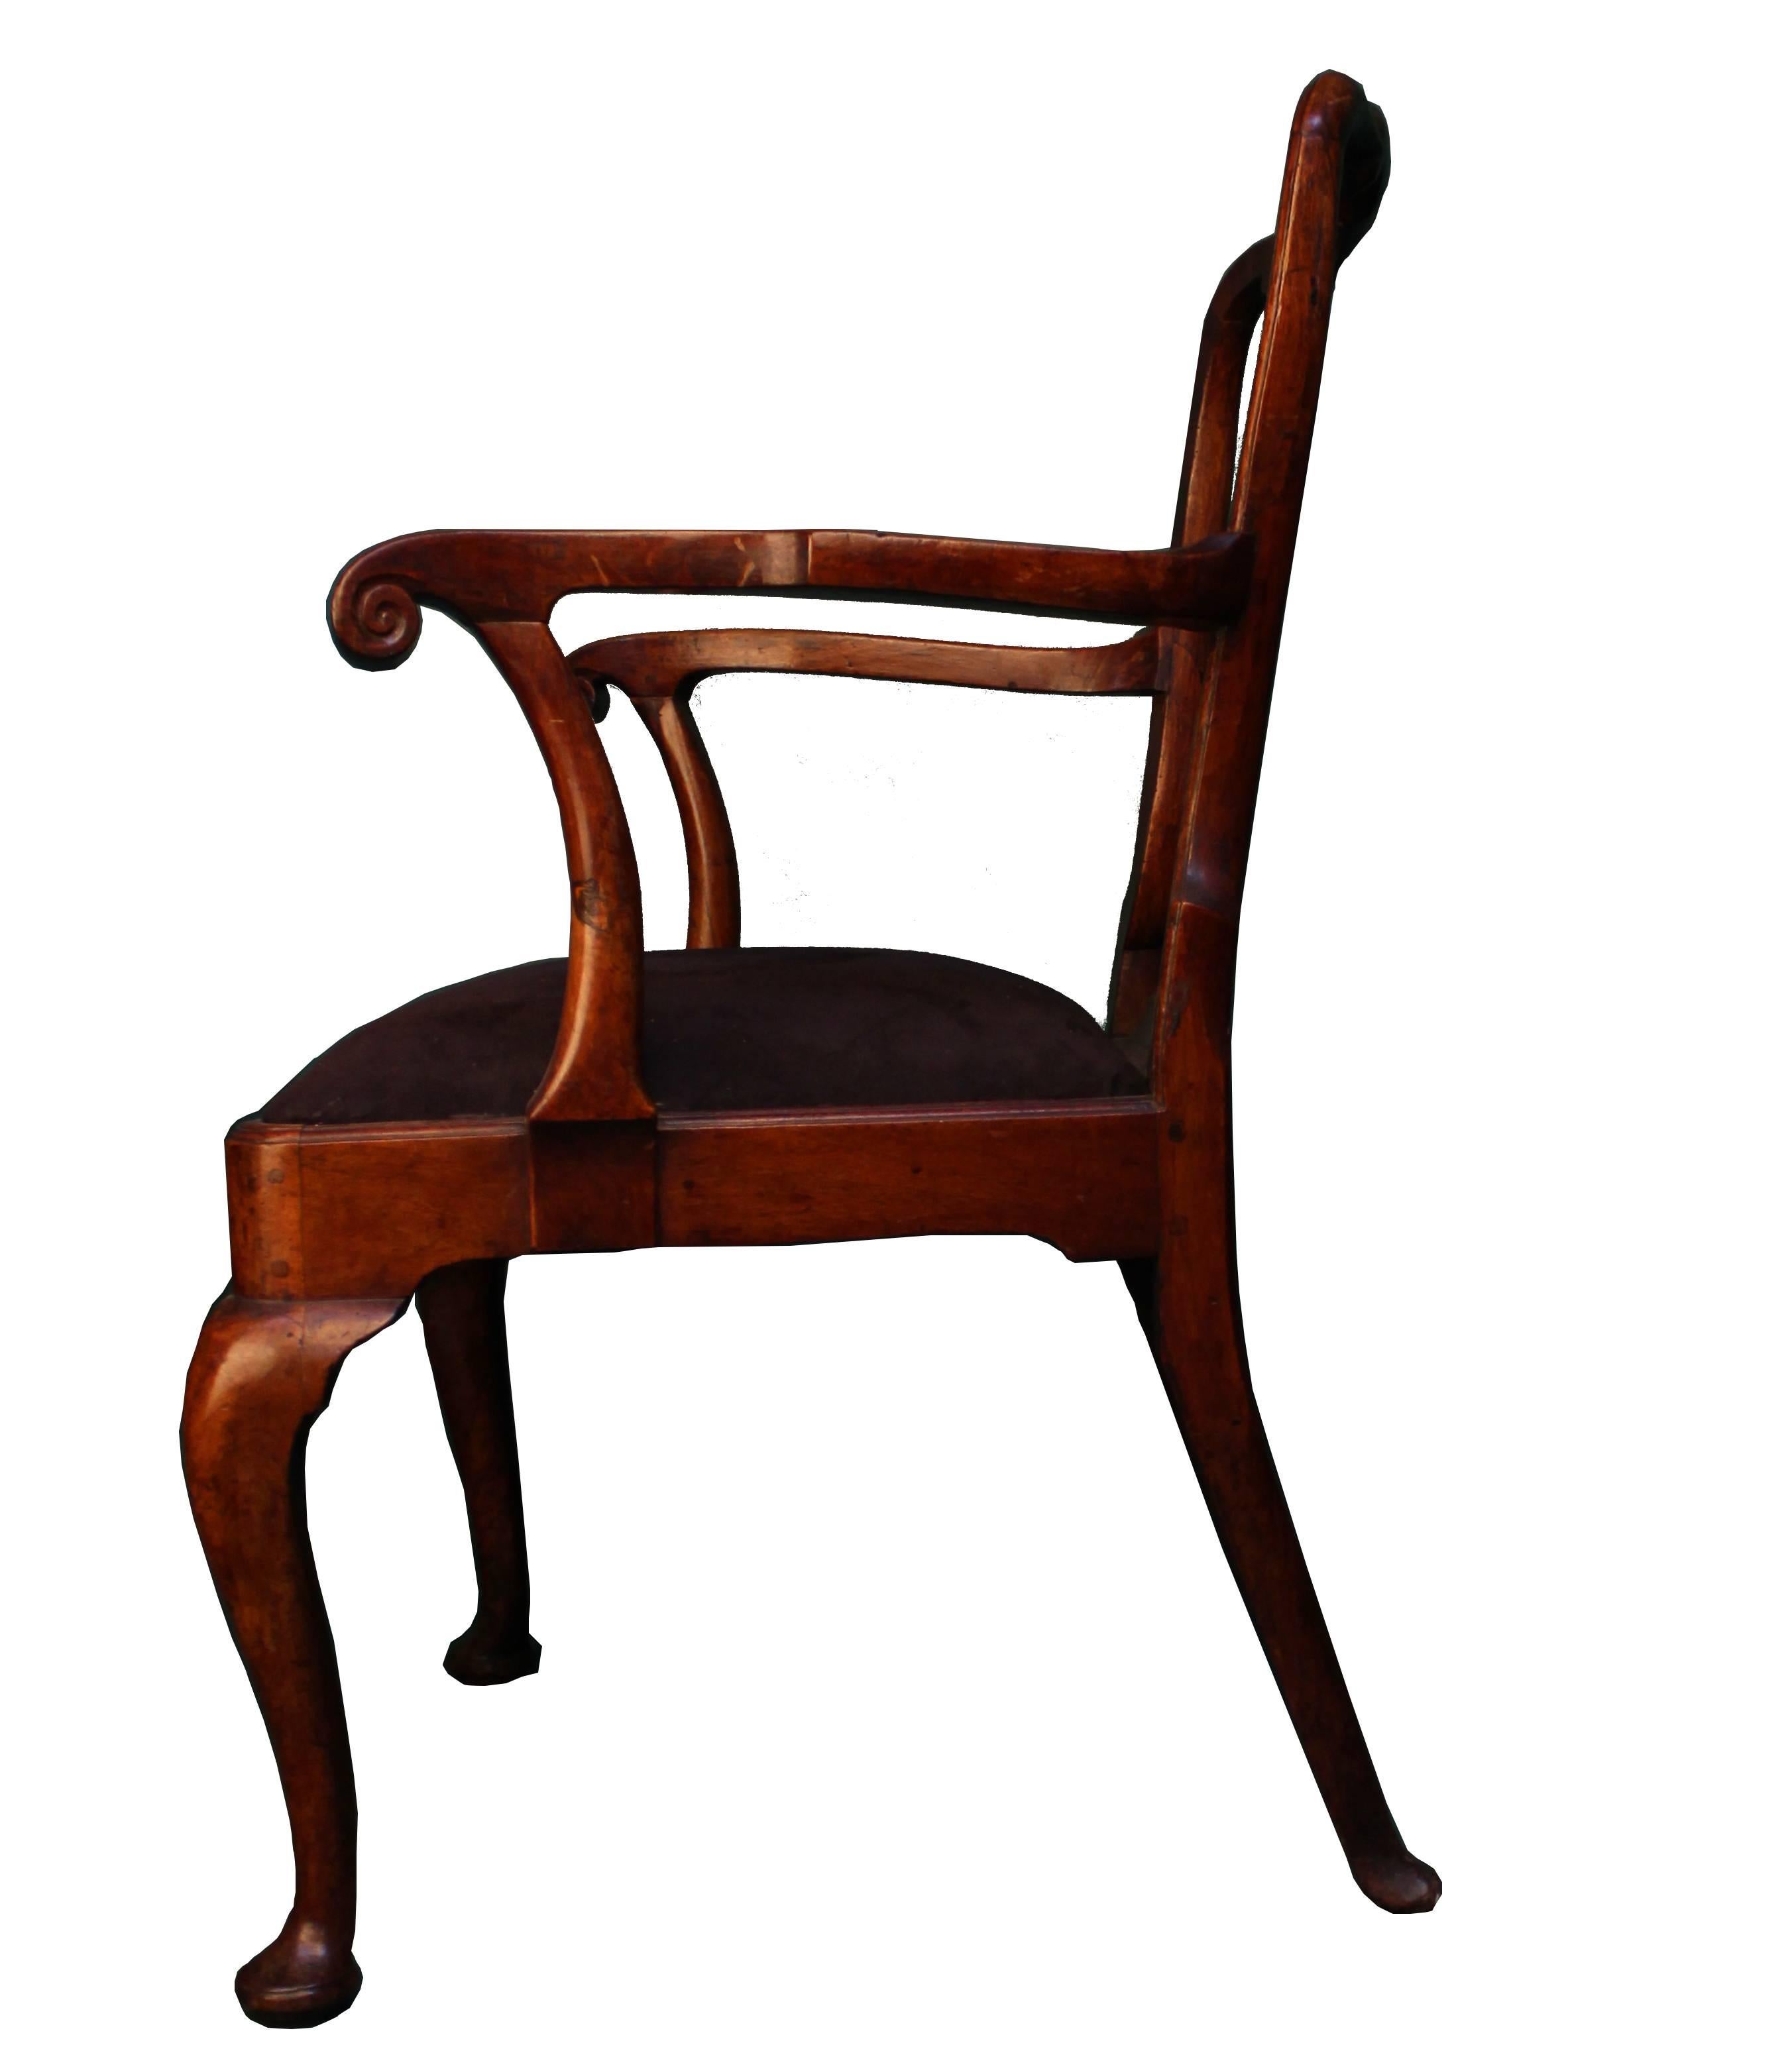 Handsome Queen Anne period walnut armchair, with fiddle shaped back and crossbanded frame. Well shaped arms terminating in a scroll. The drop in seat housed within a crossbanded apron raised upon cabriole legs.

Measurements:
95cms high
69cms -